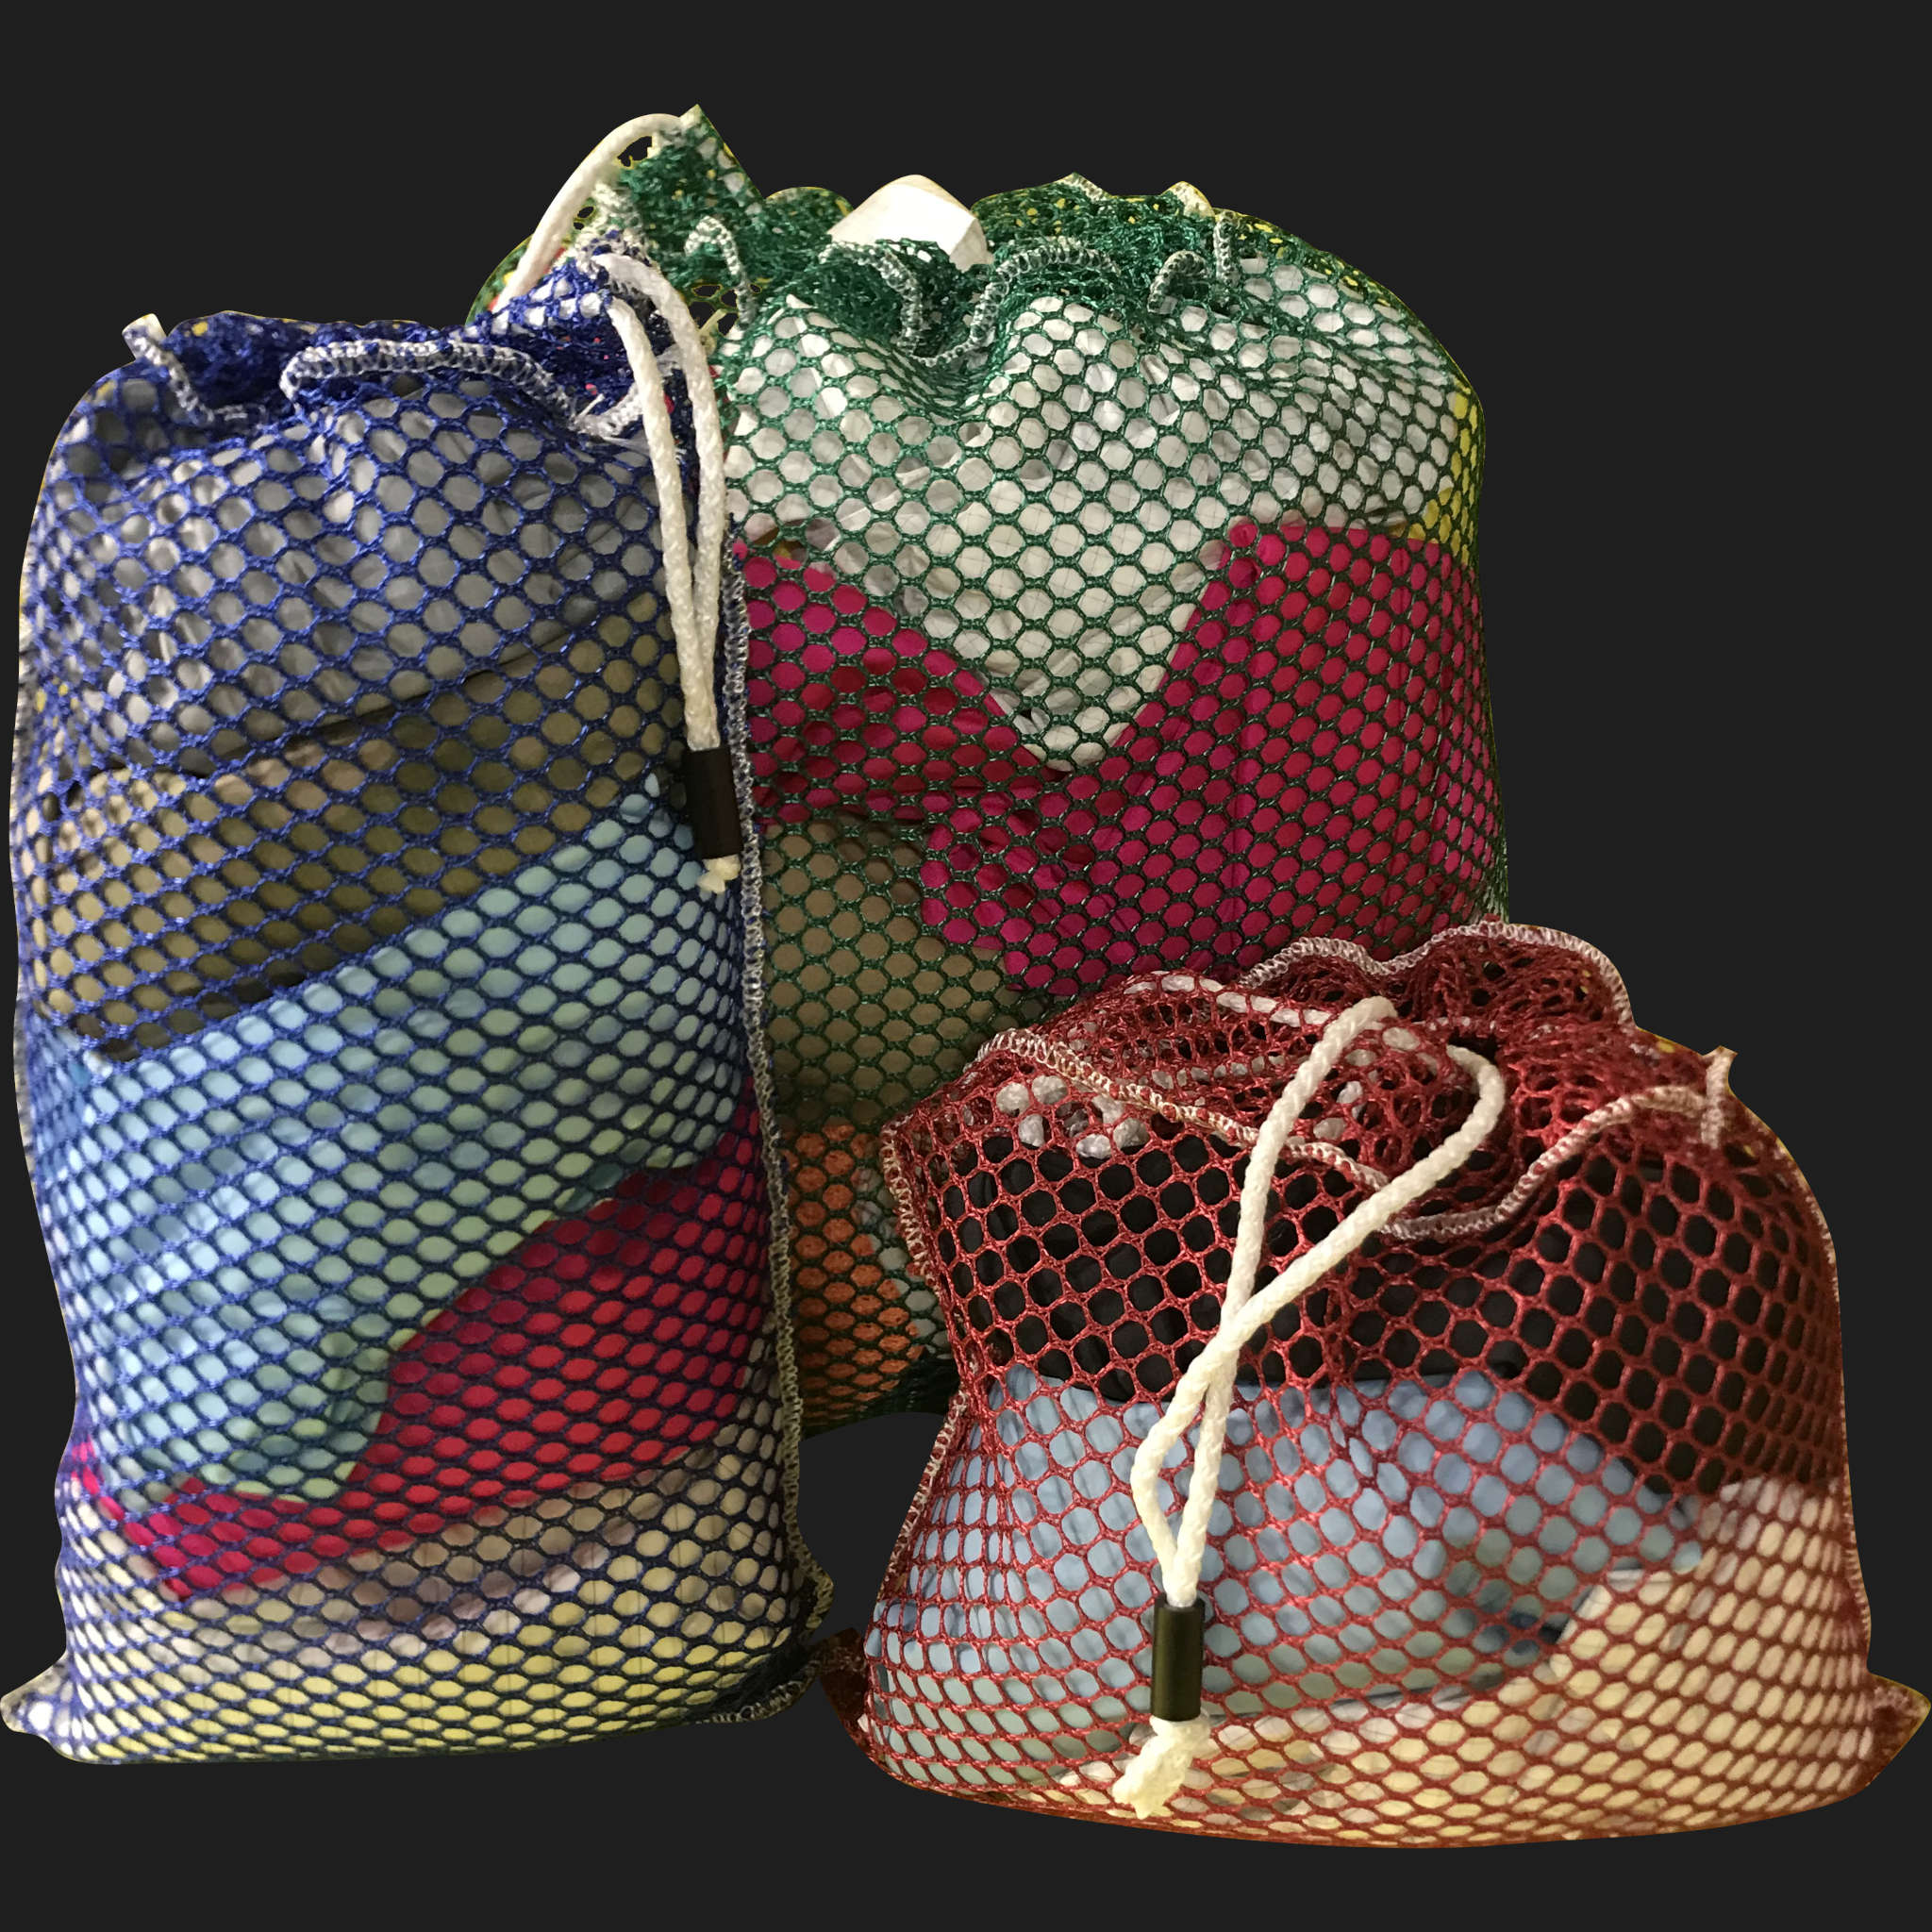 26" x 40" Customized Mesh-Net-Laundry Bags Heavy Duty with Cord and barrellock closure